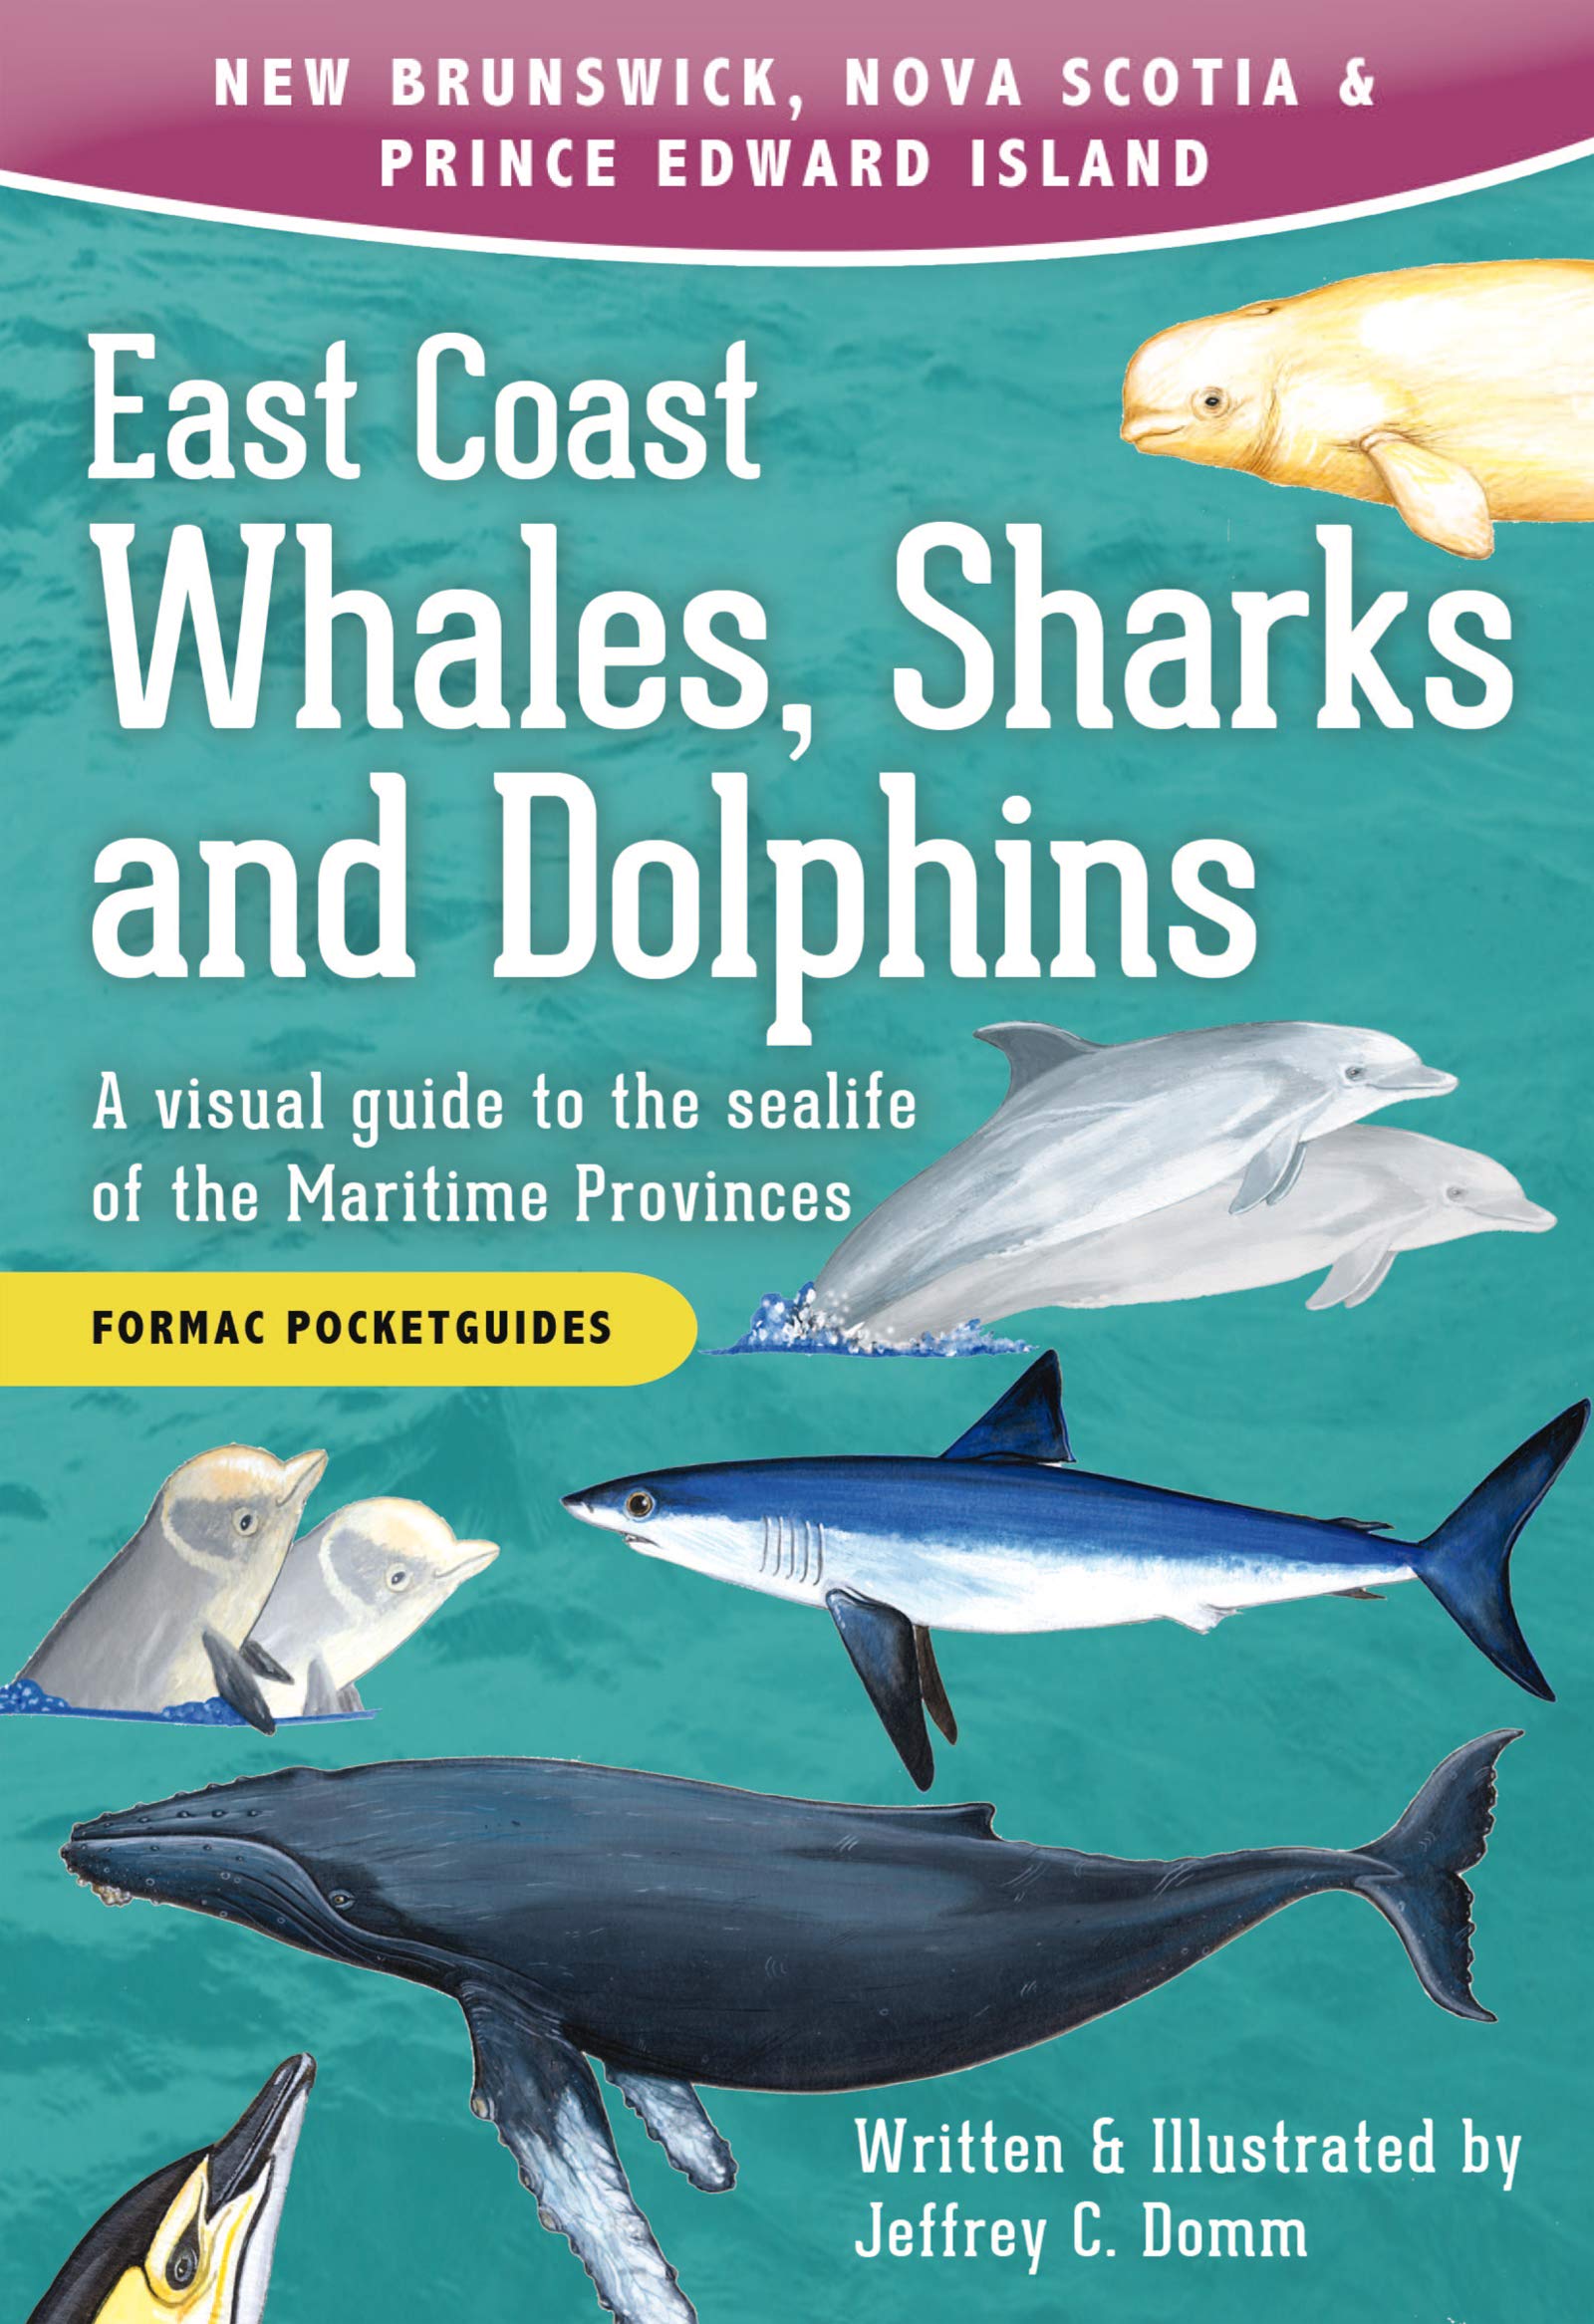 East Coast Whales, Sharks and Dolphins: A visual guide 2e